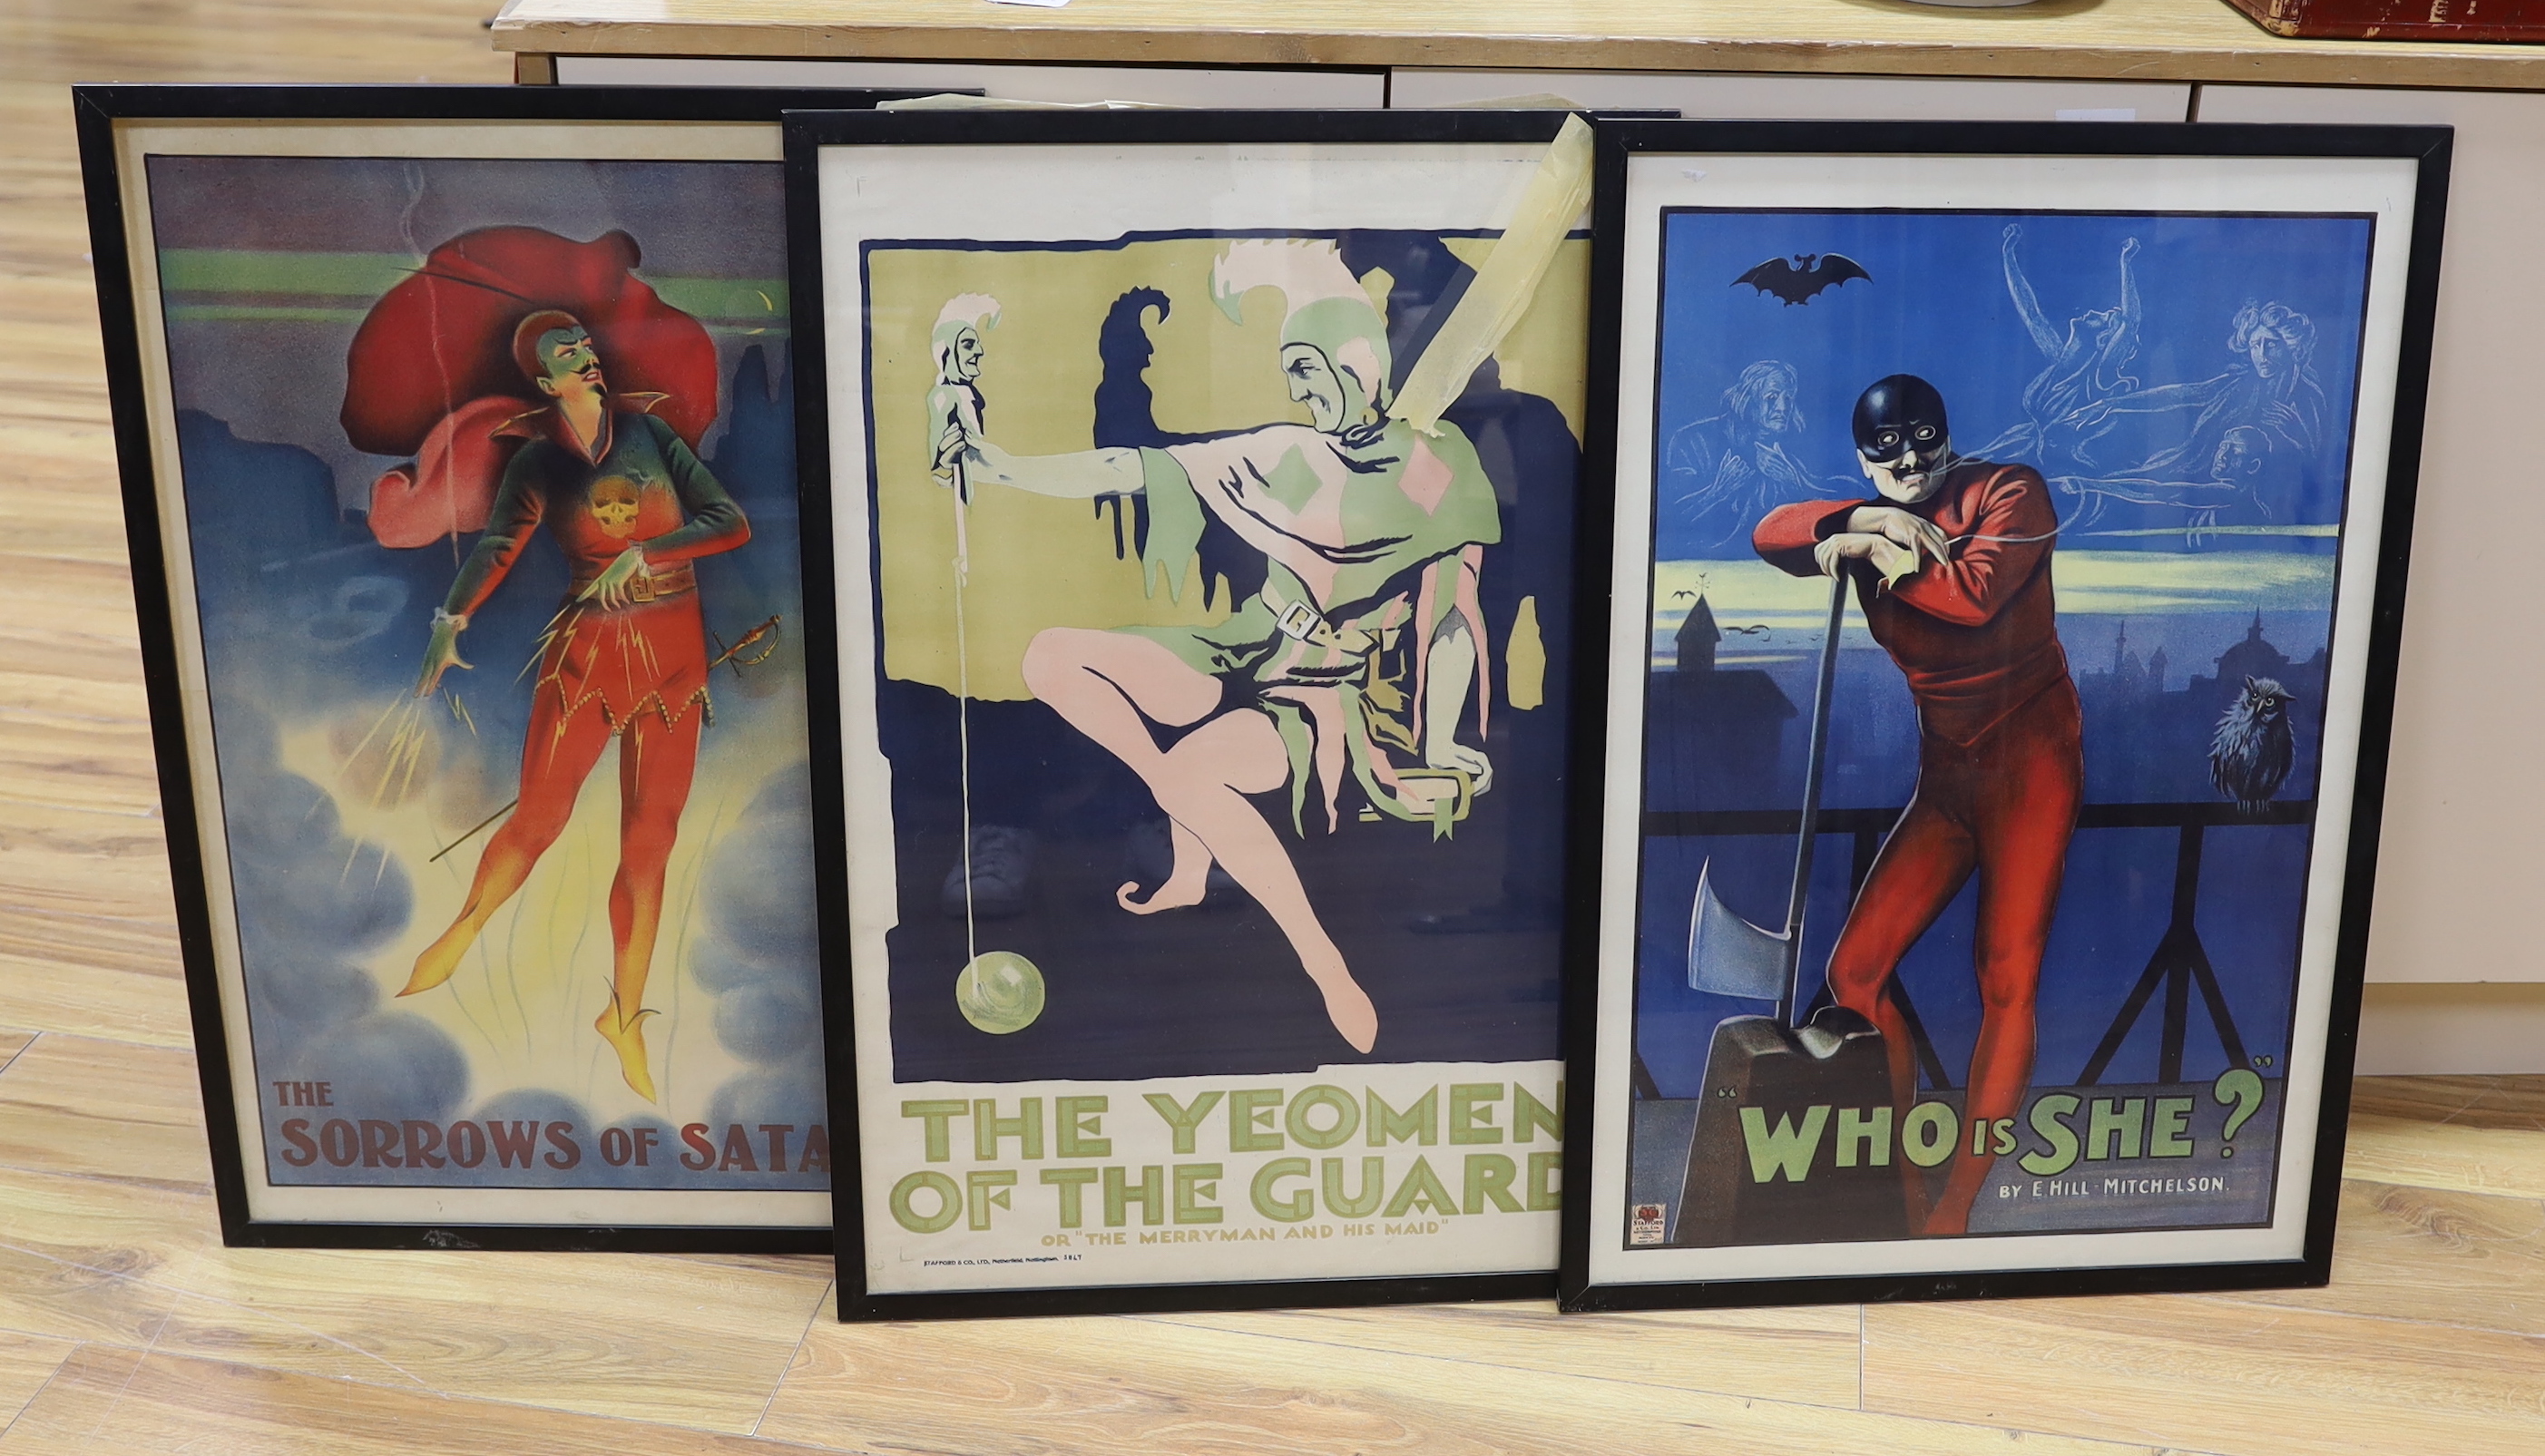 Three vintage Stafford & Co. Ltd, Nottingham theatre posters, comprising 'The Sorrows of Satan', 'The Yeoman of the Guard' and 'Who is She?', 75 x 50cm